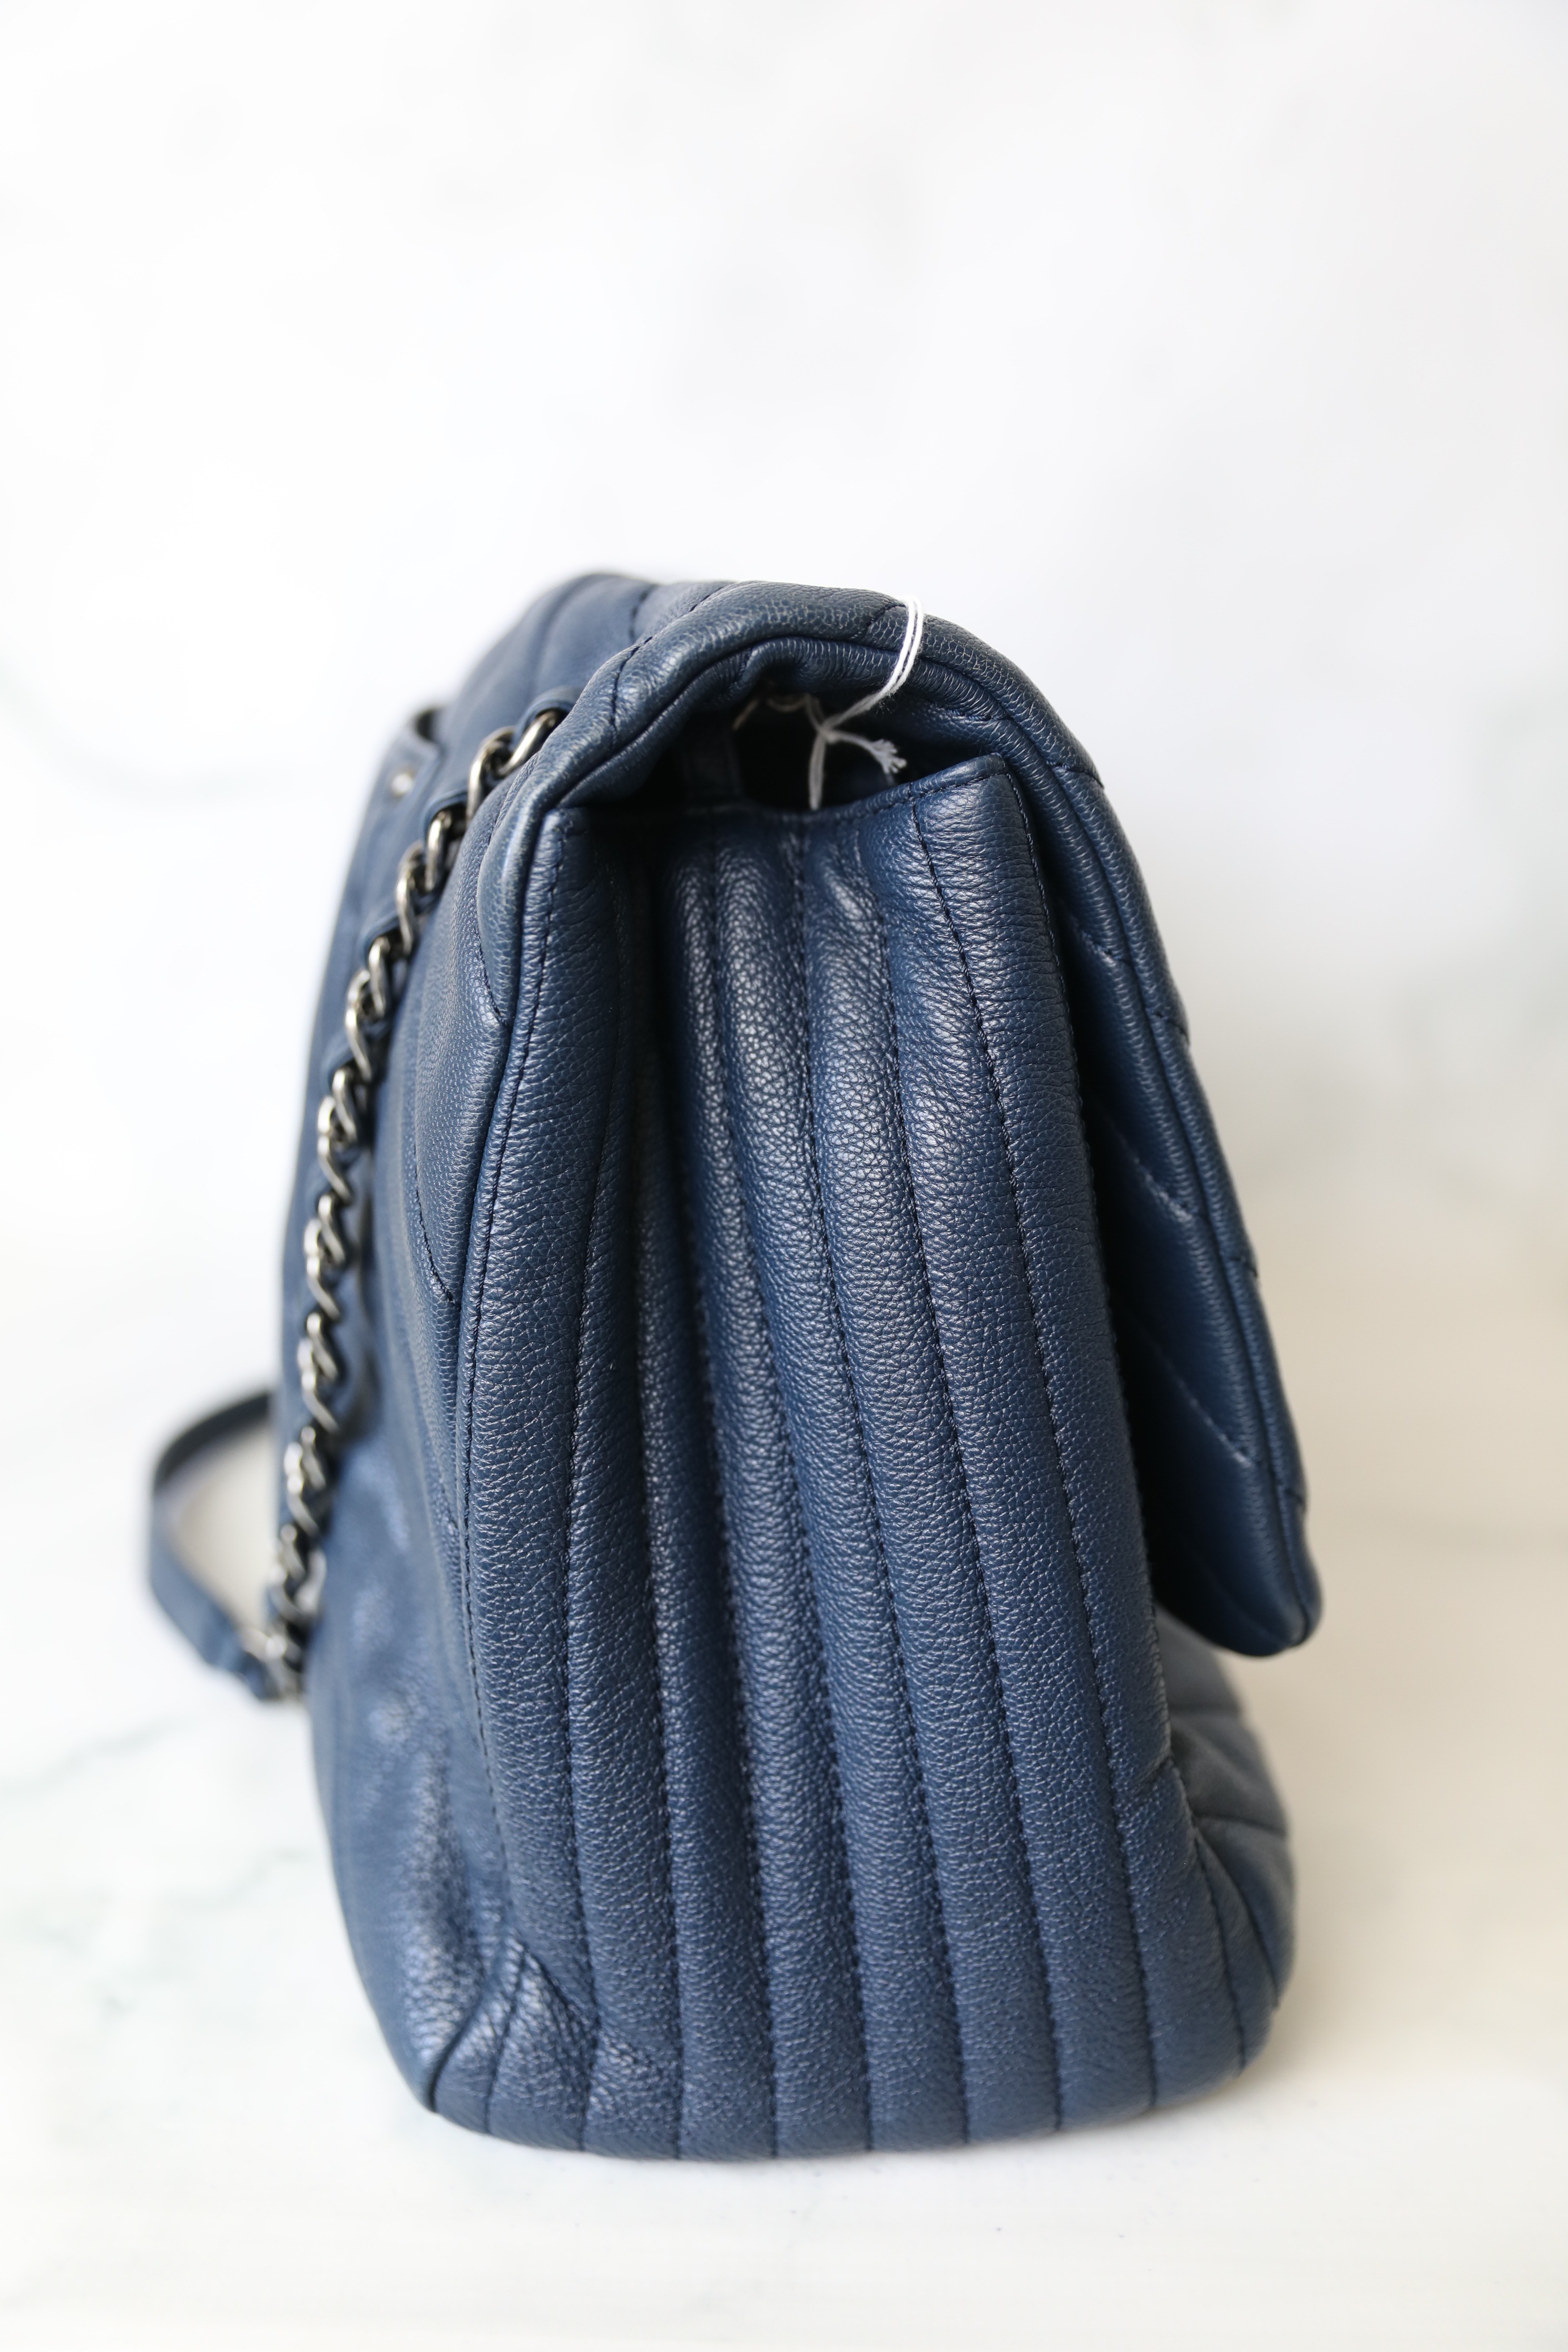 Chanel XXL Airline Flap, Navy Calfskin with Ruthenium Hardware, Preowned in  Box WA001 - Julia Rose Boston